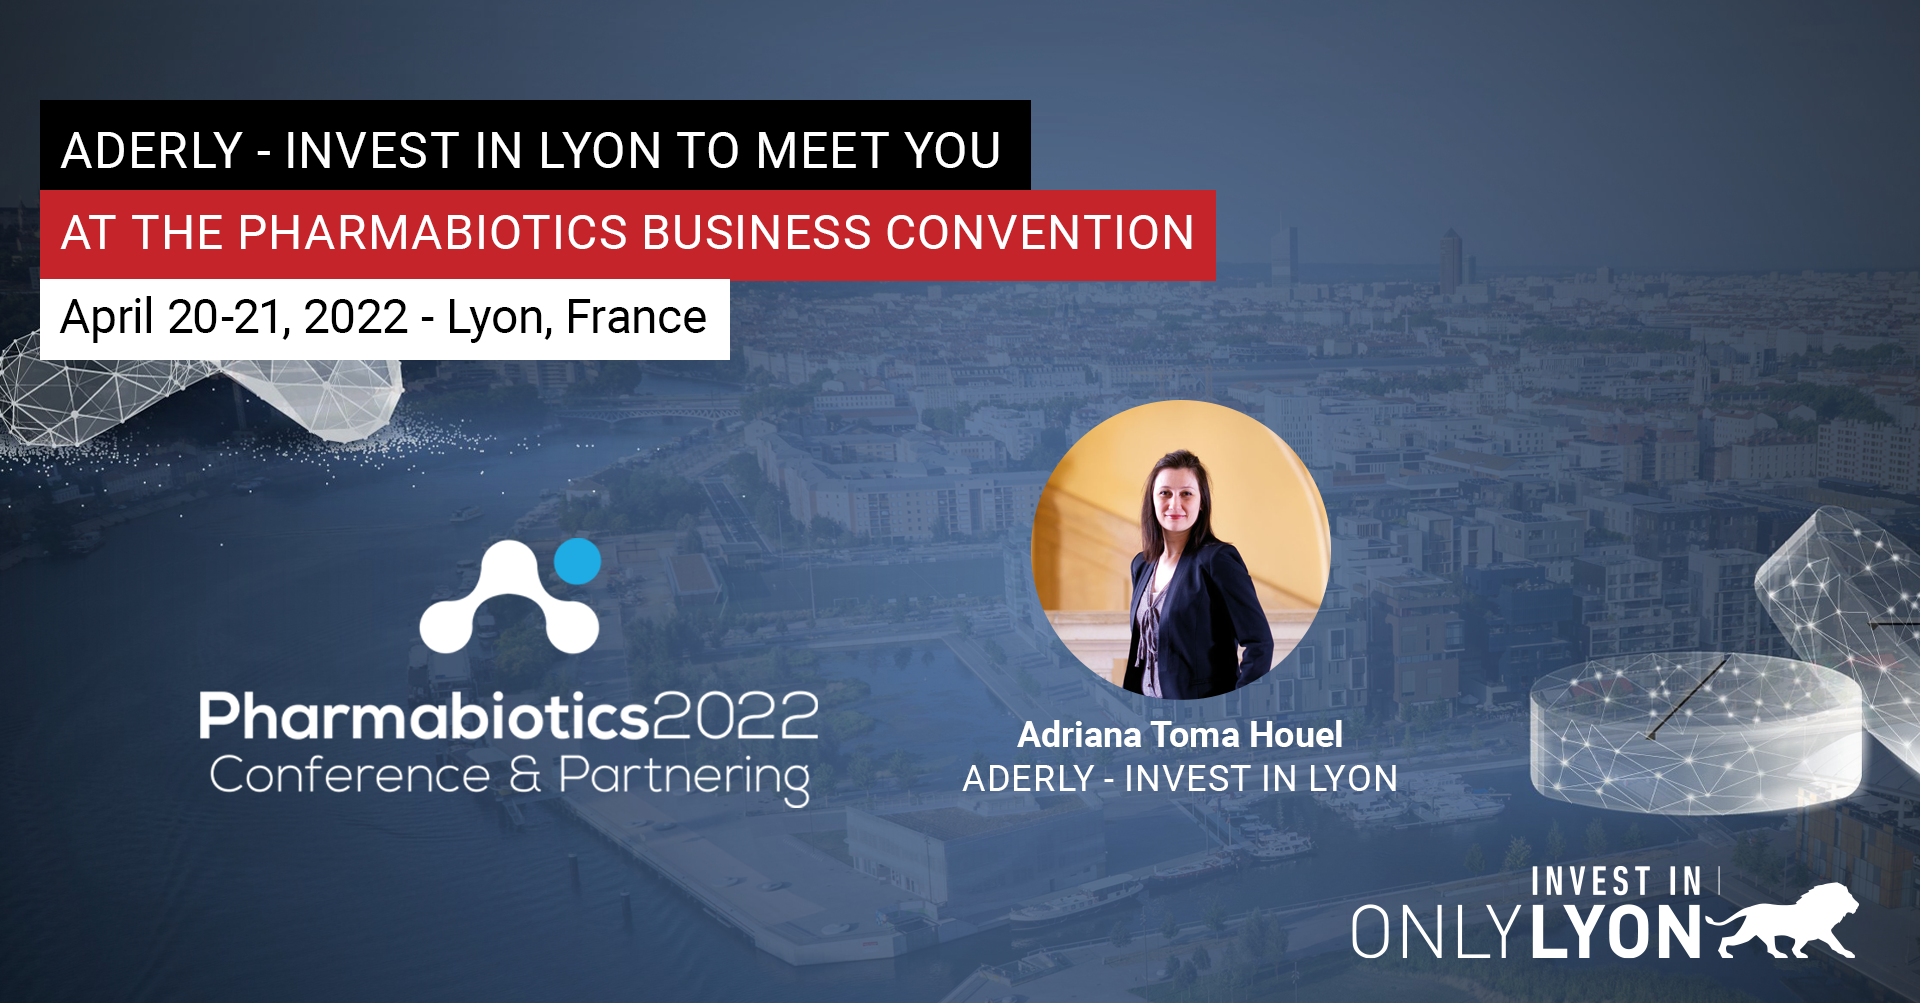 See the event Our Aderly expert on hand to meet you at the Pharmabiotics 2022 business conference and convention in Lyon